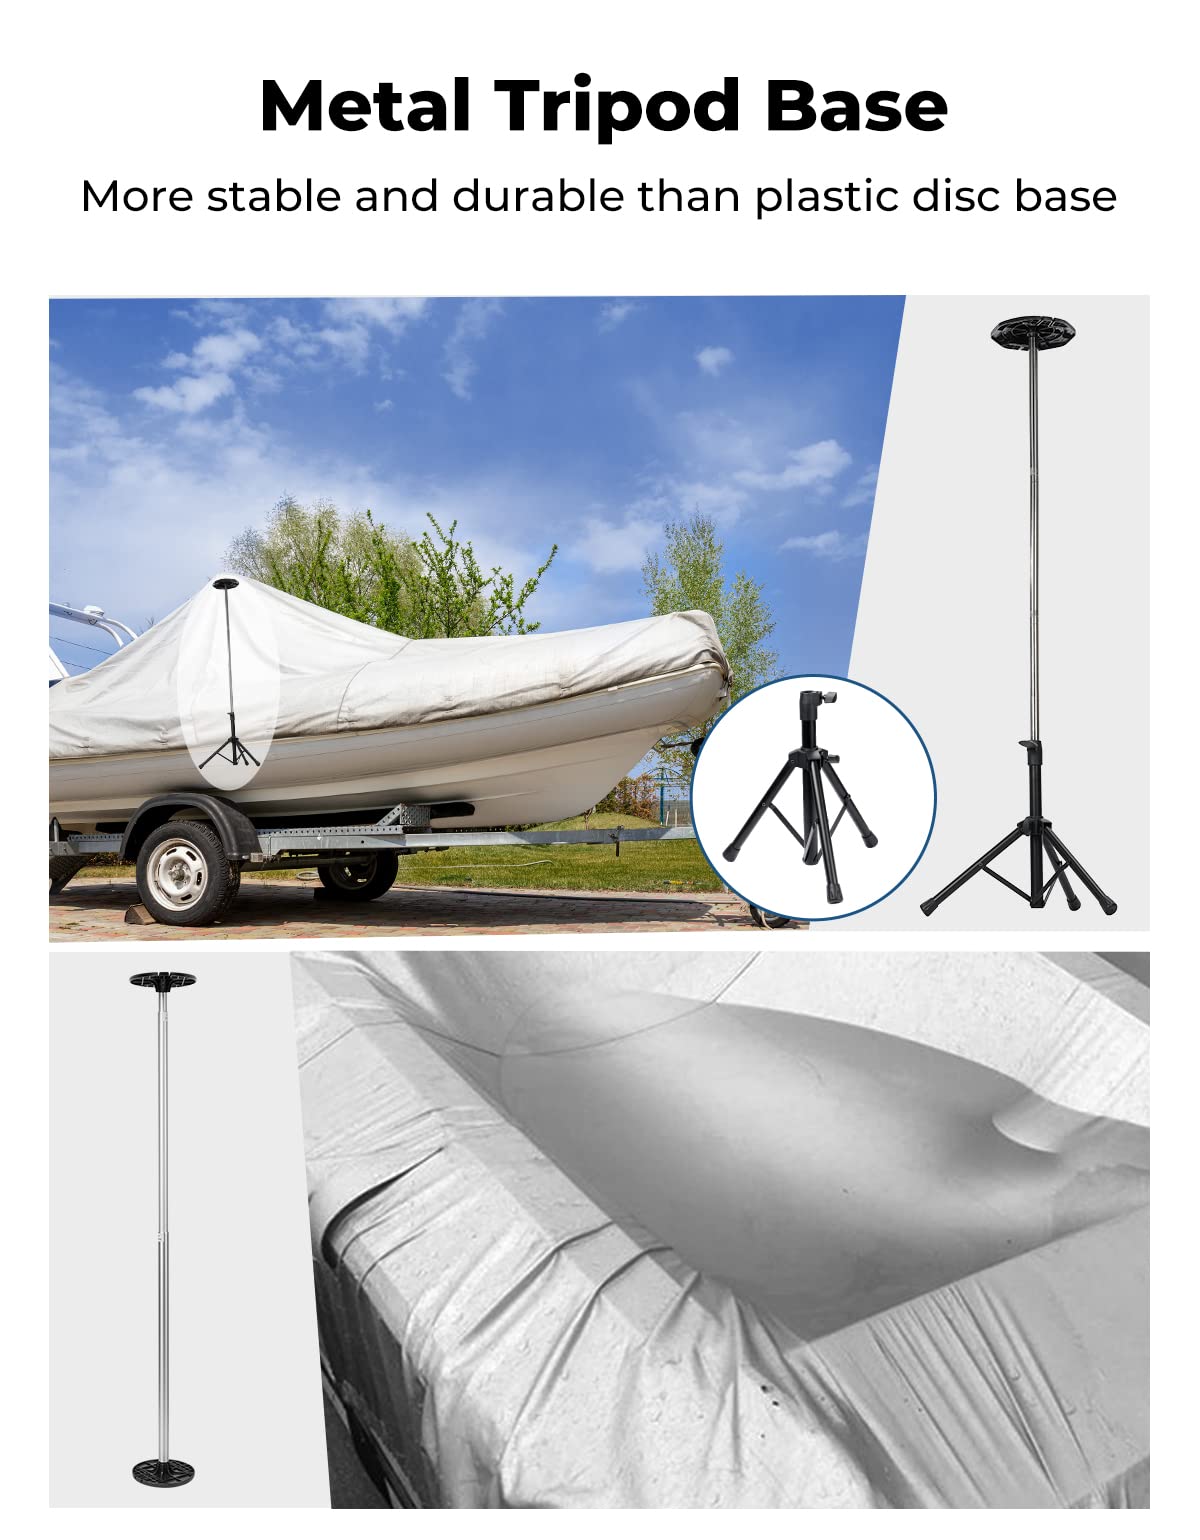 Boat Cover Support with Metal Tripod Base and Mushroom Top